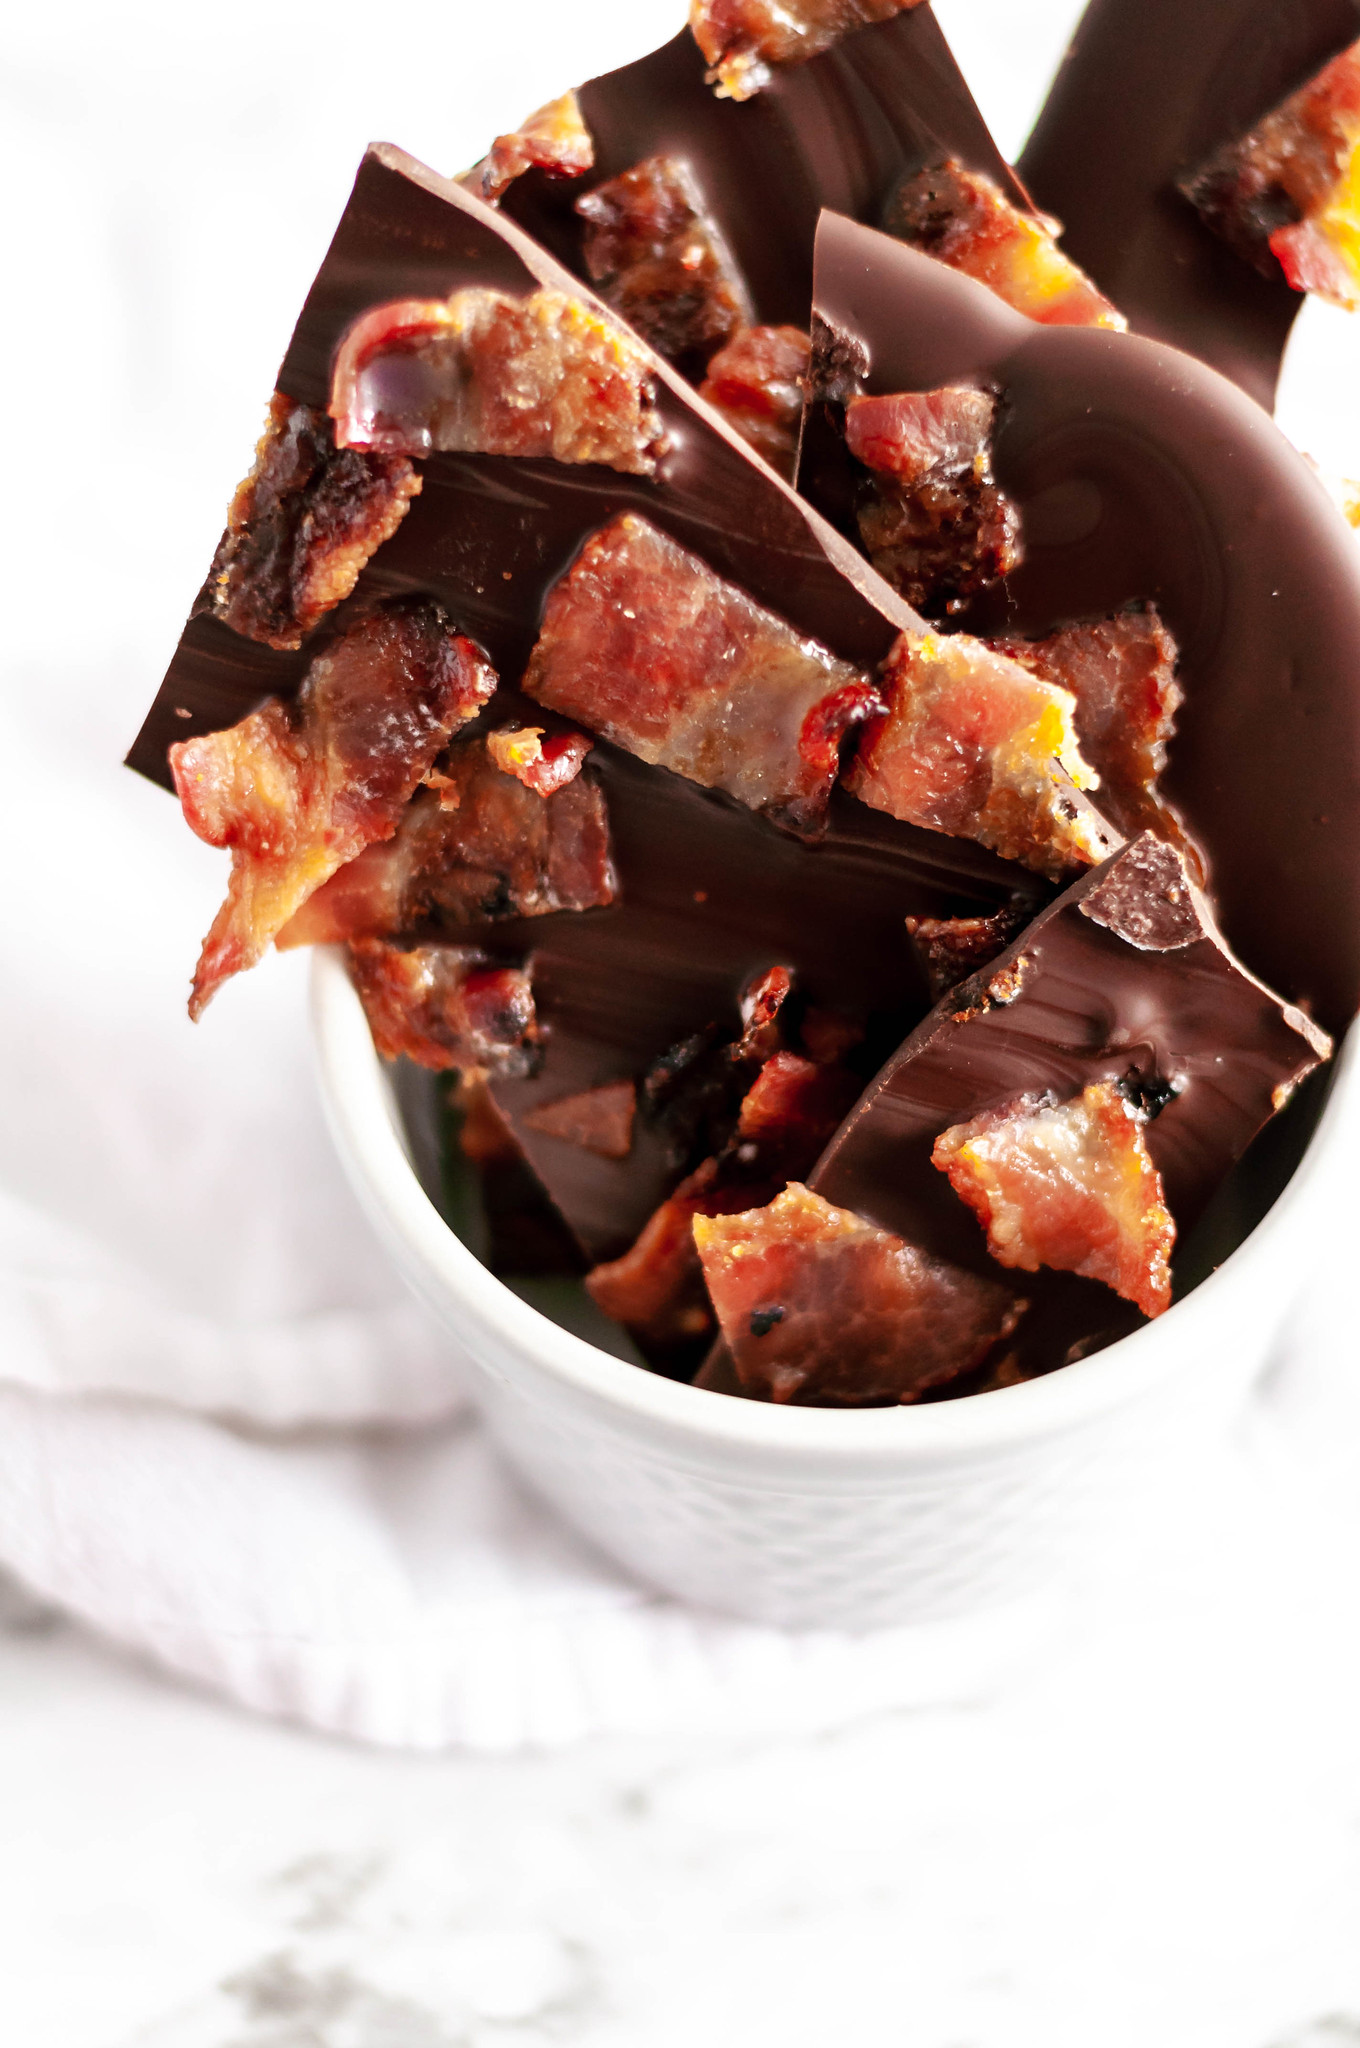 Candied Bacon Bark is a super simple, 4-ingredient treat that is perfect for the bacon lover in your life this Christmas. A fun, different addition to your Christmas baking list this year.